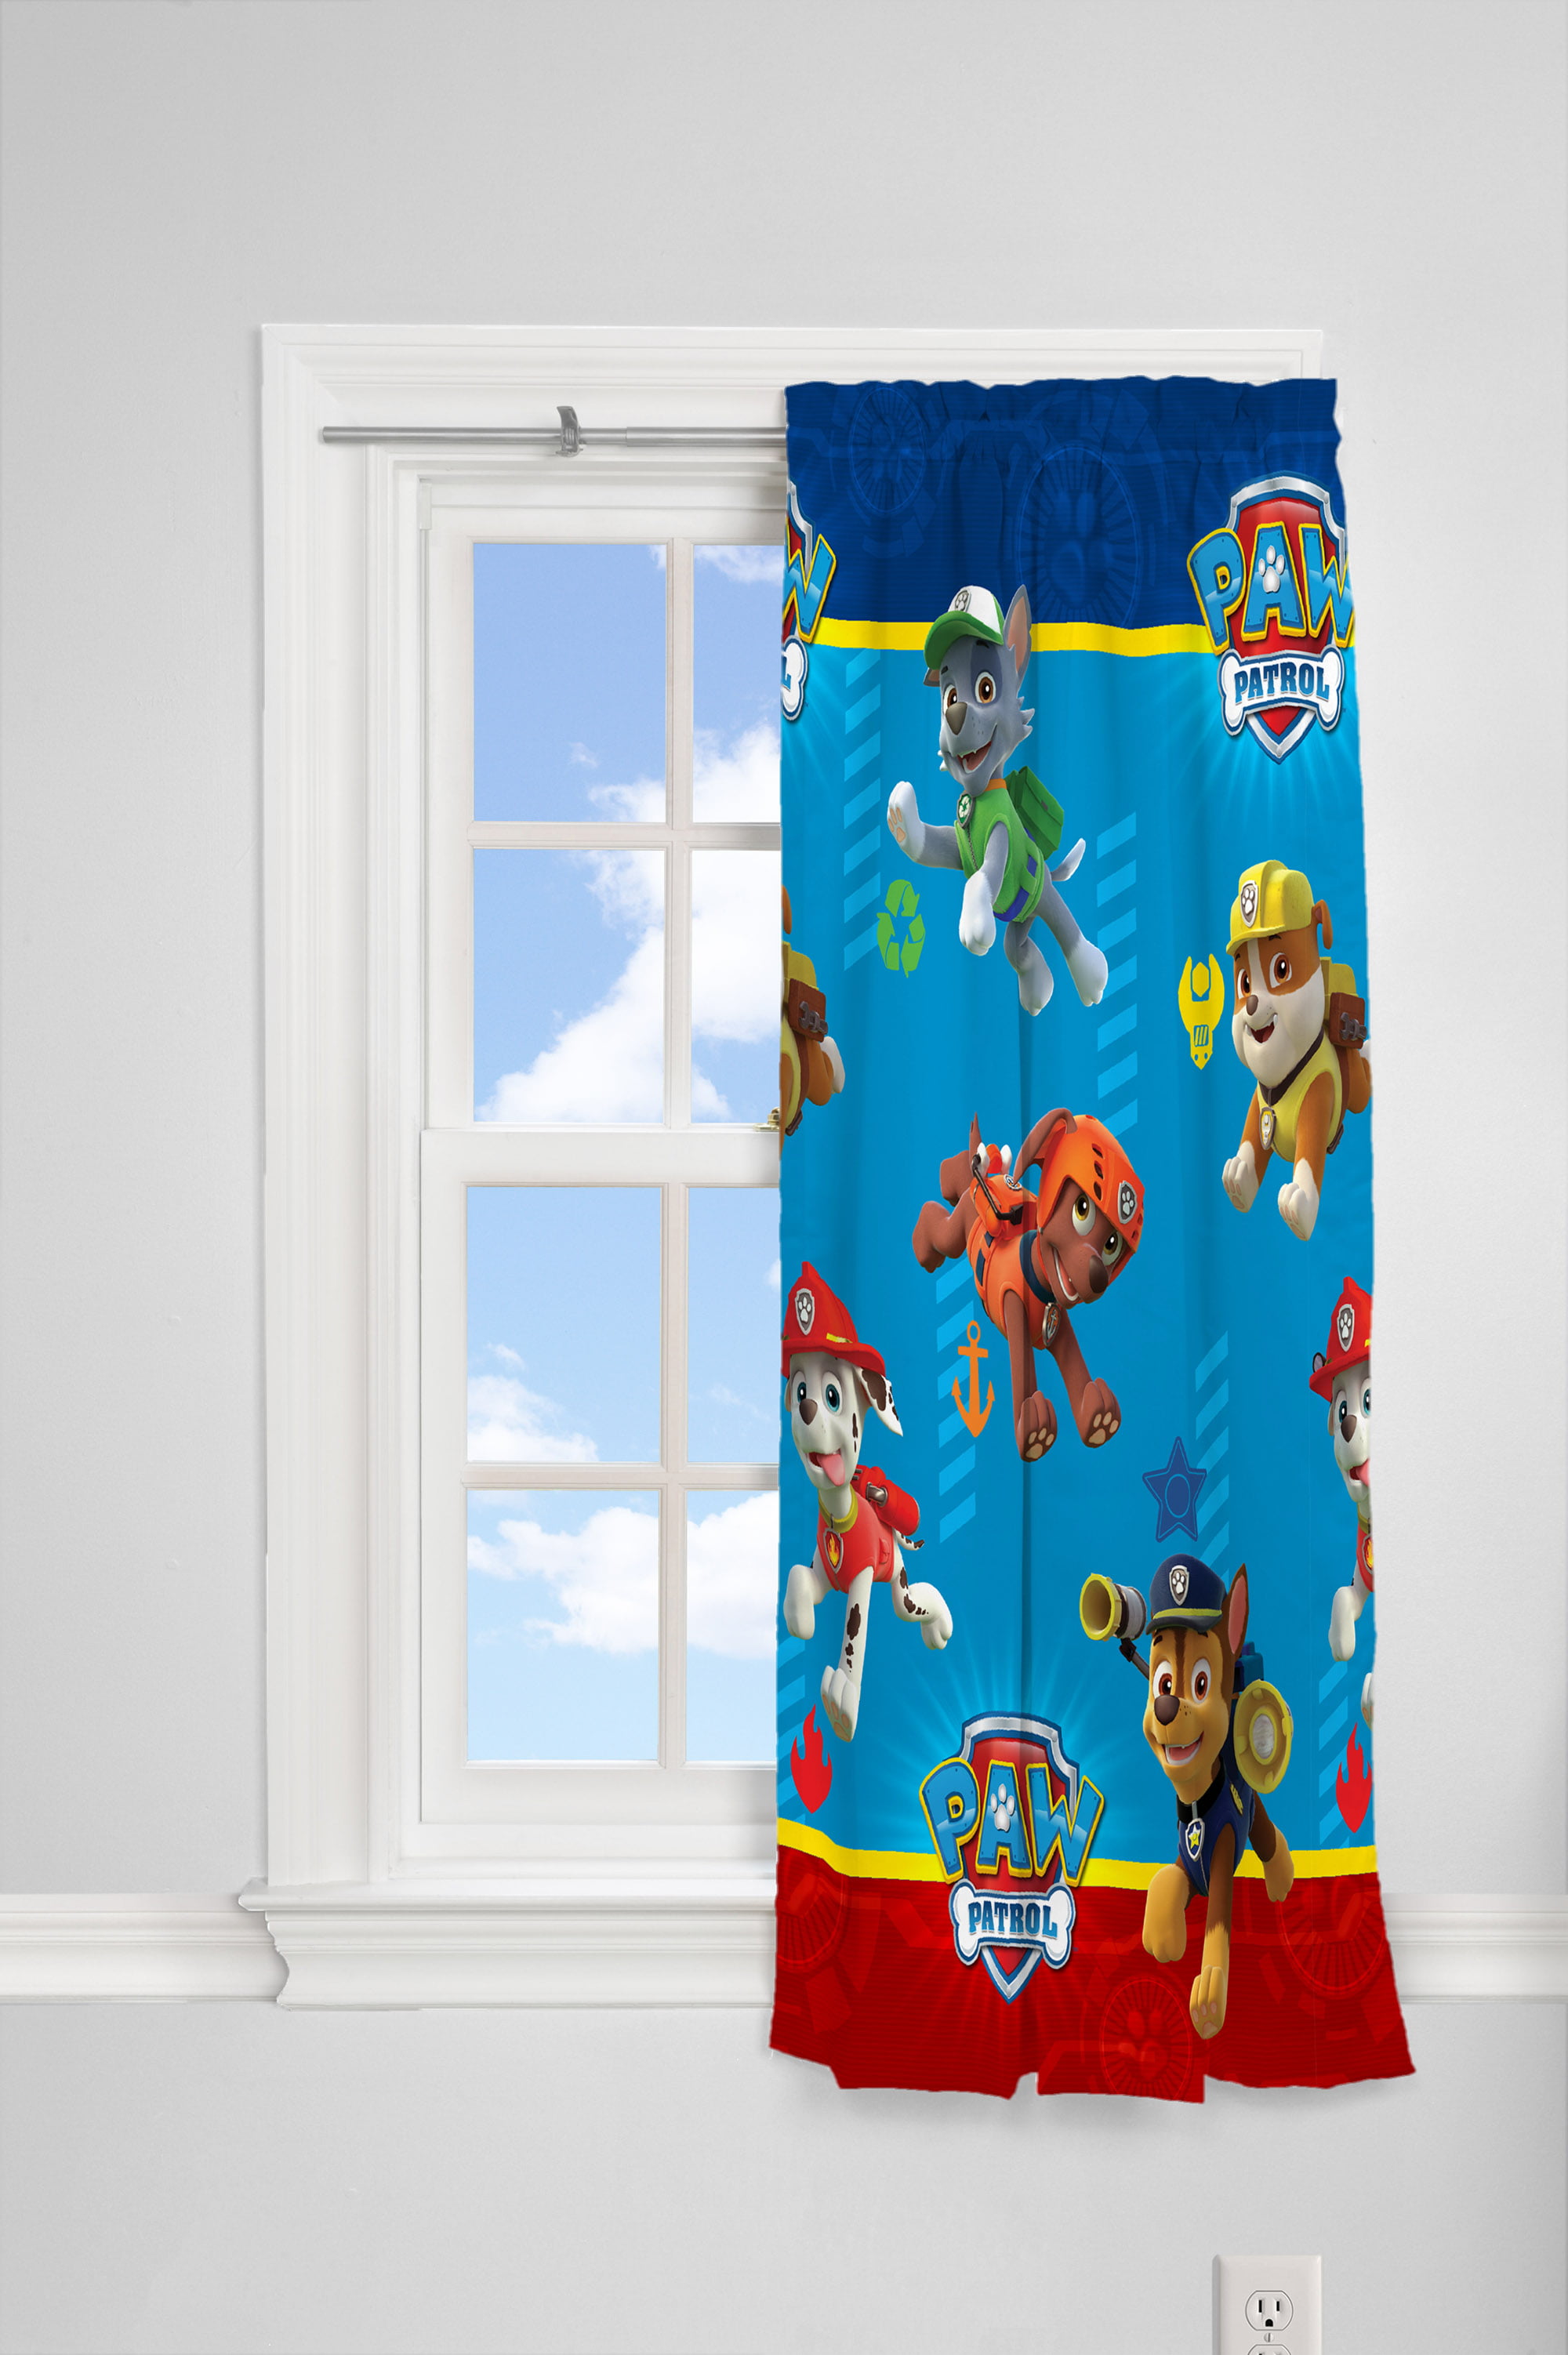 Paw Patrol Nickelodeon Curtains Panels or Valance Nursery Bedroom Blackout or Cotton YOU PICK